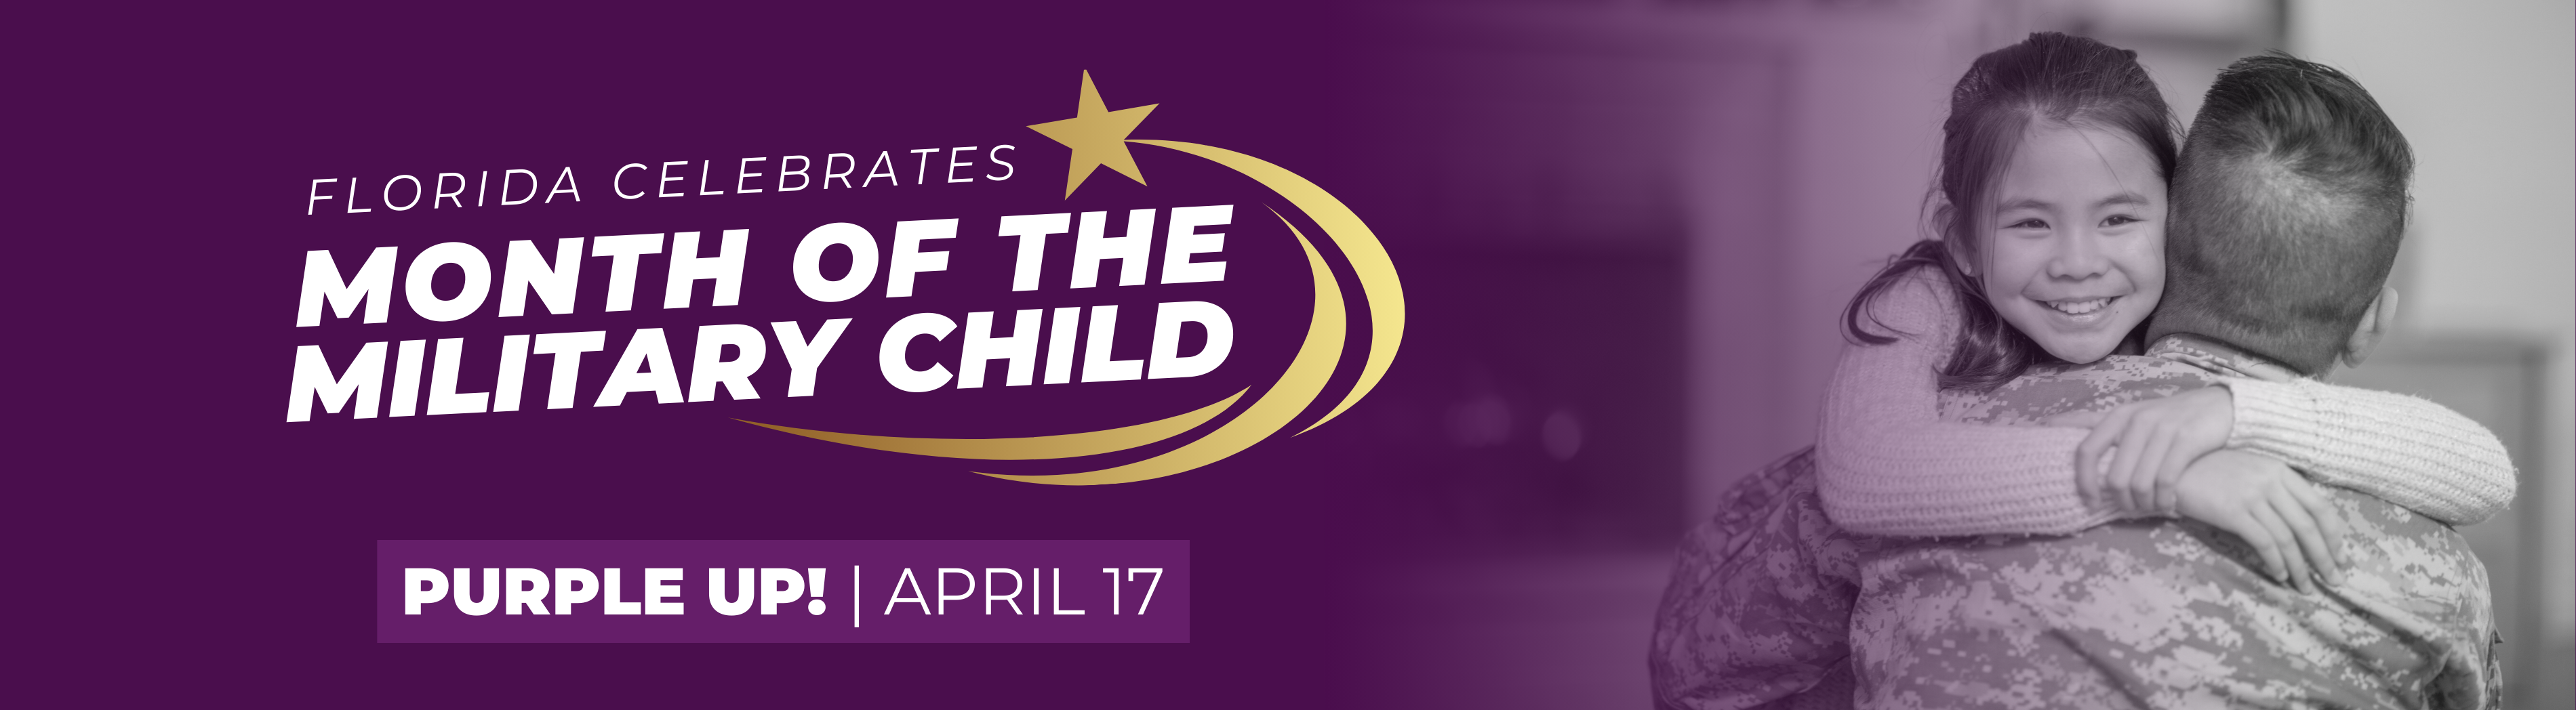 Florida Celebrates Month of the Military Child - Purple Up! April 17